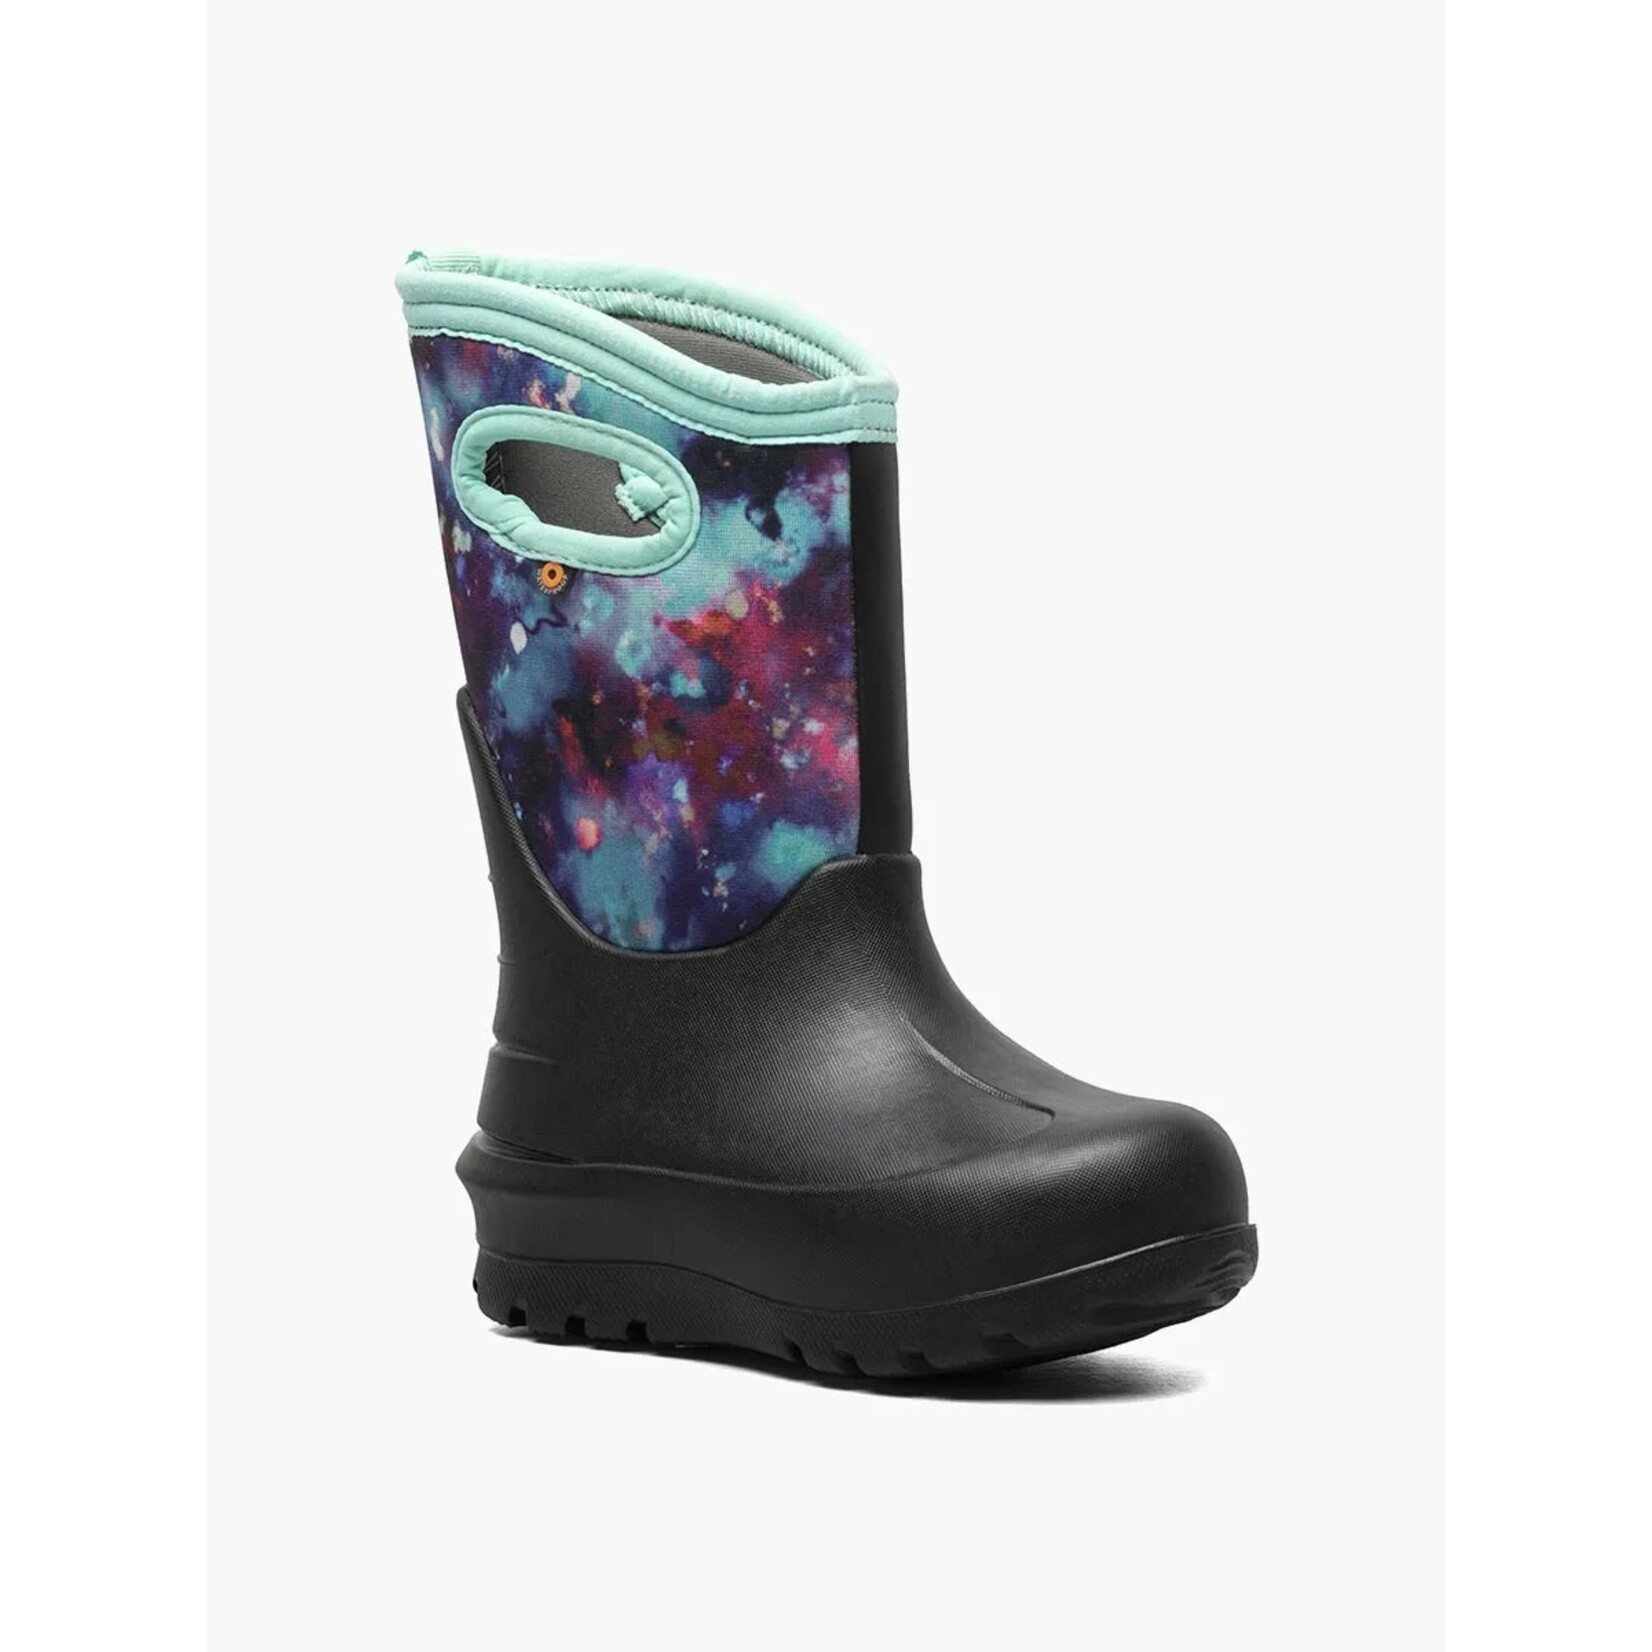 BOGS BOGS - Waterproof Winter Boots 'Neo-Classic' - Sparkle Space